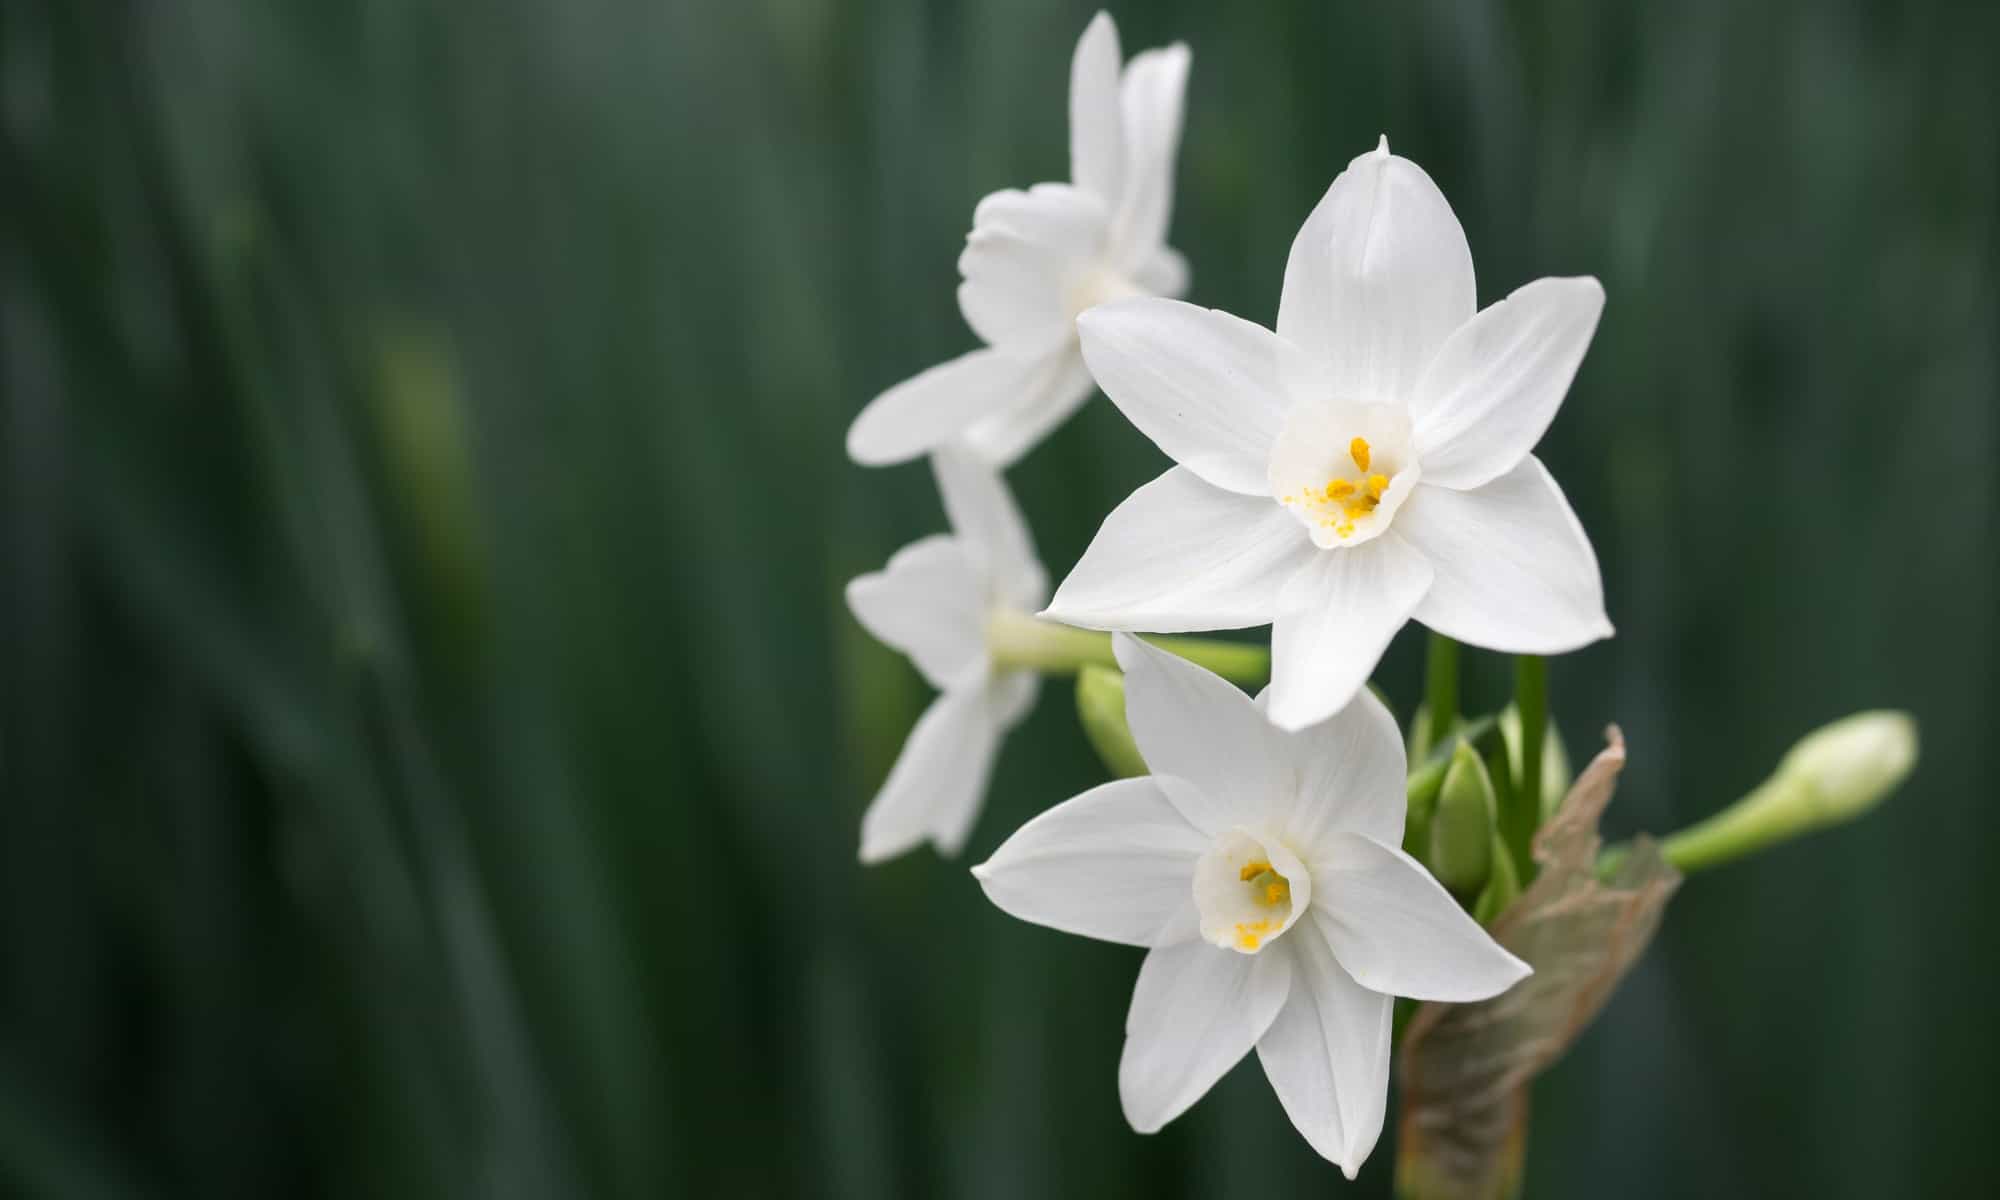 narcissus vs daffodil: is there a difference? - az animals